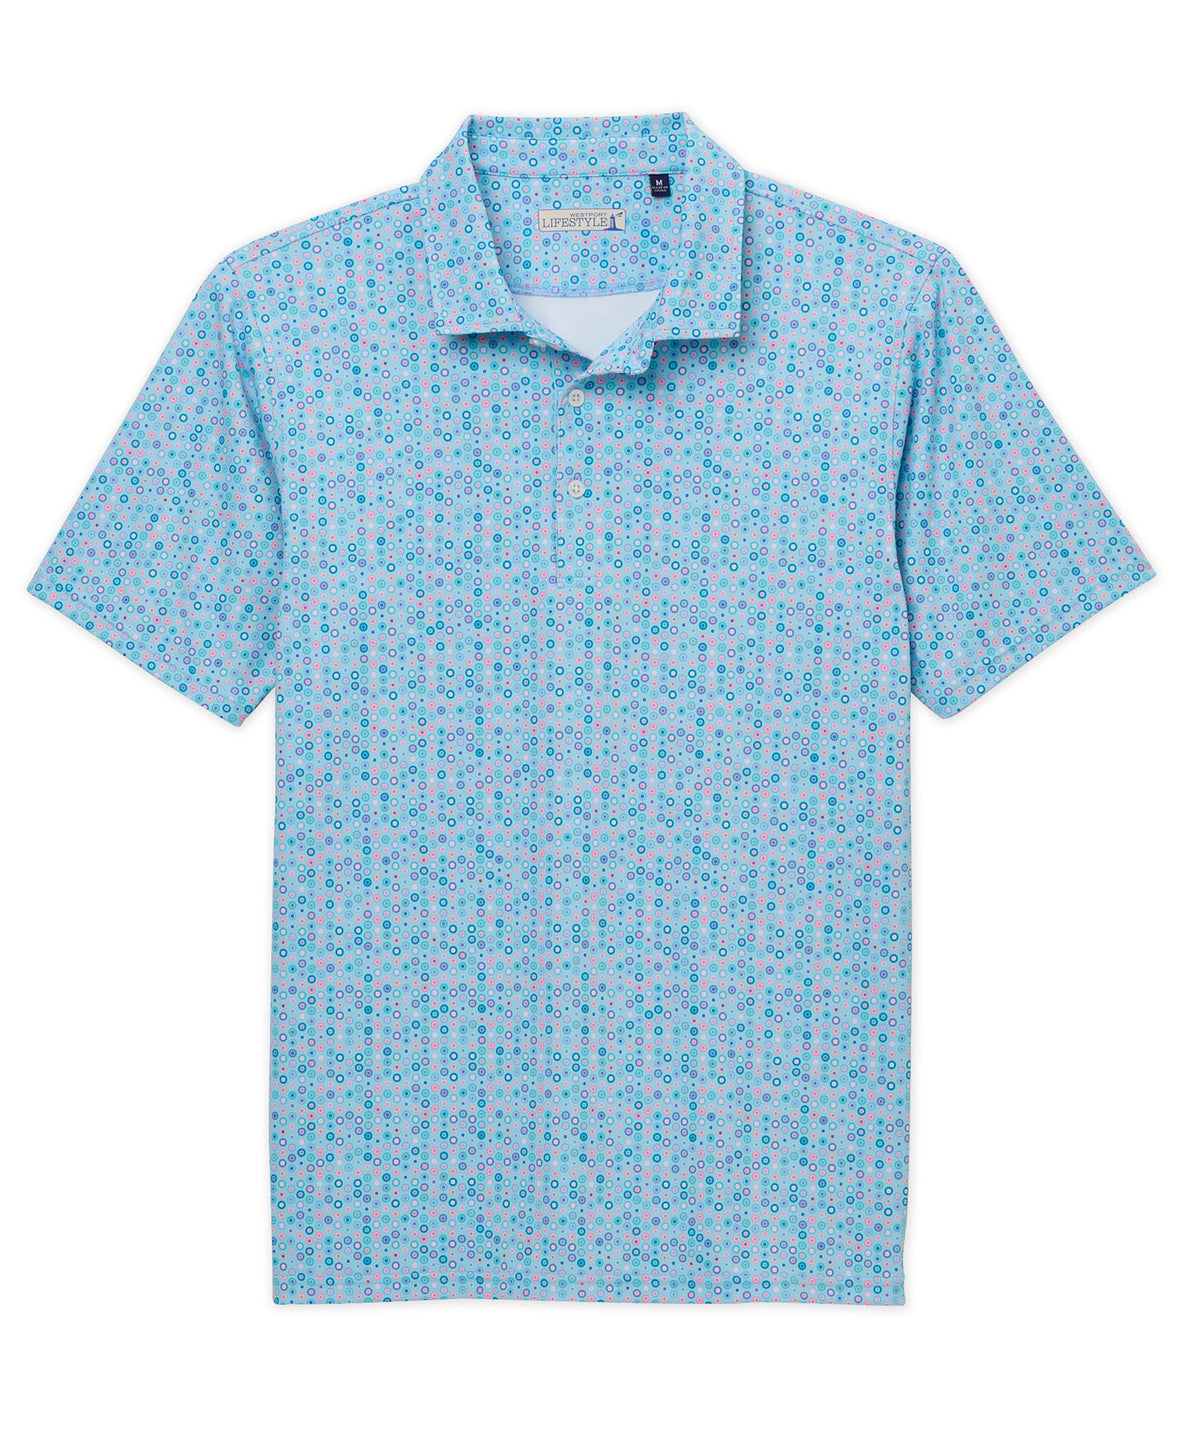 Westport Lifestyle Hoops Print Performance Polo Knit Shirt